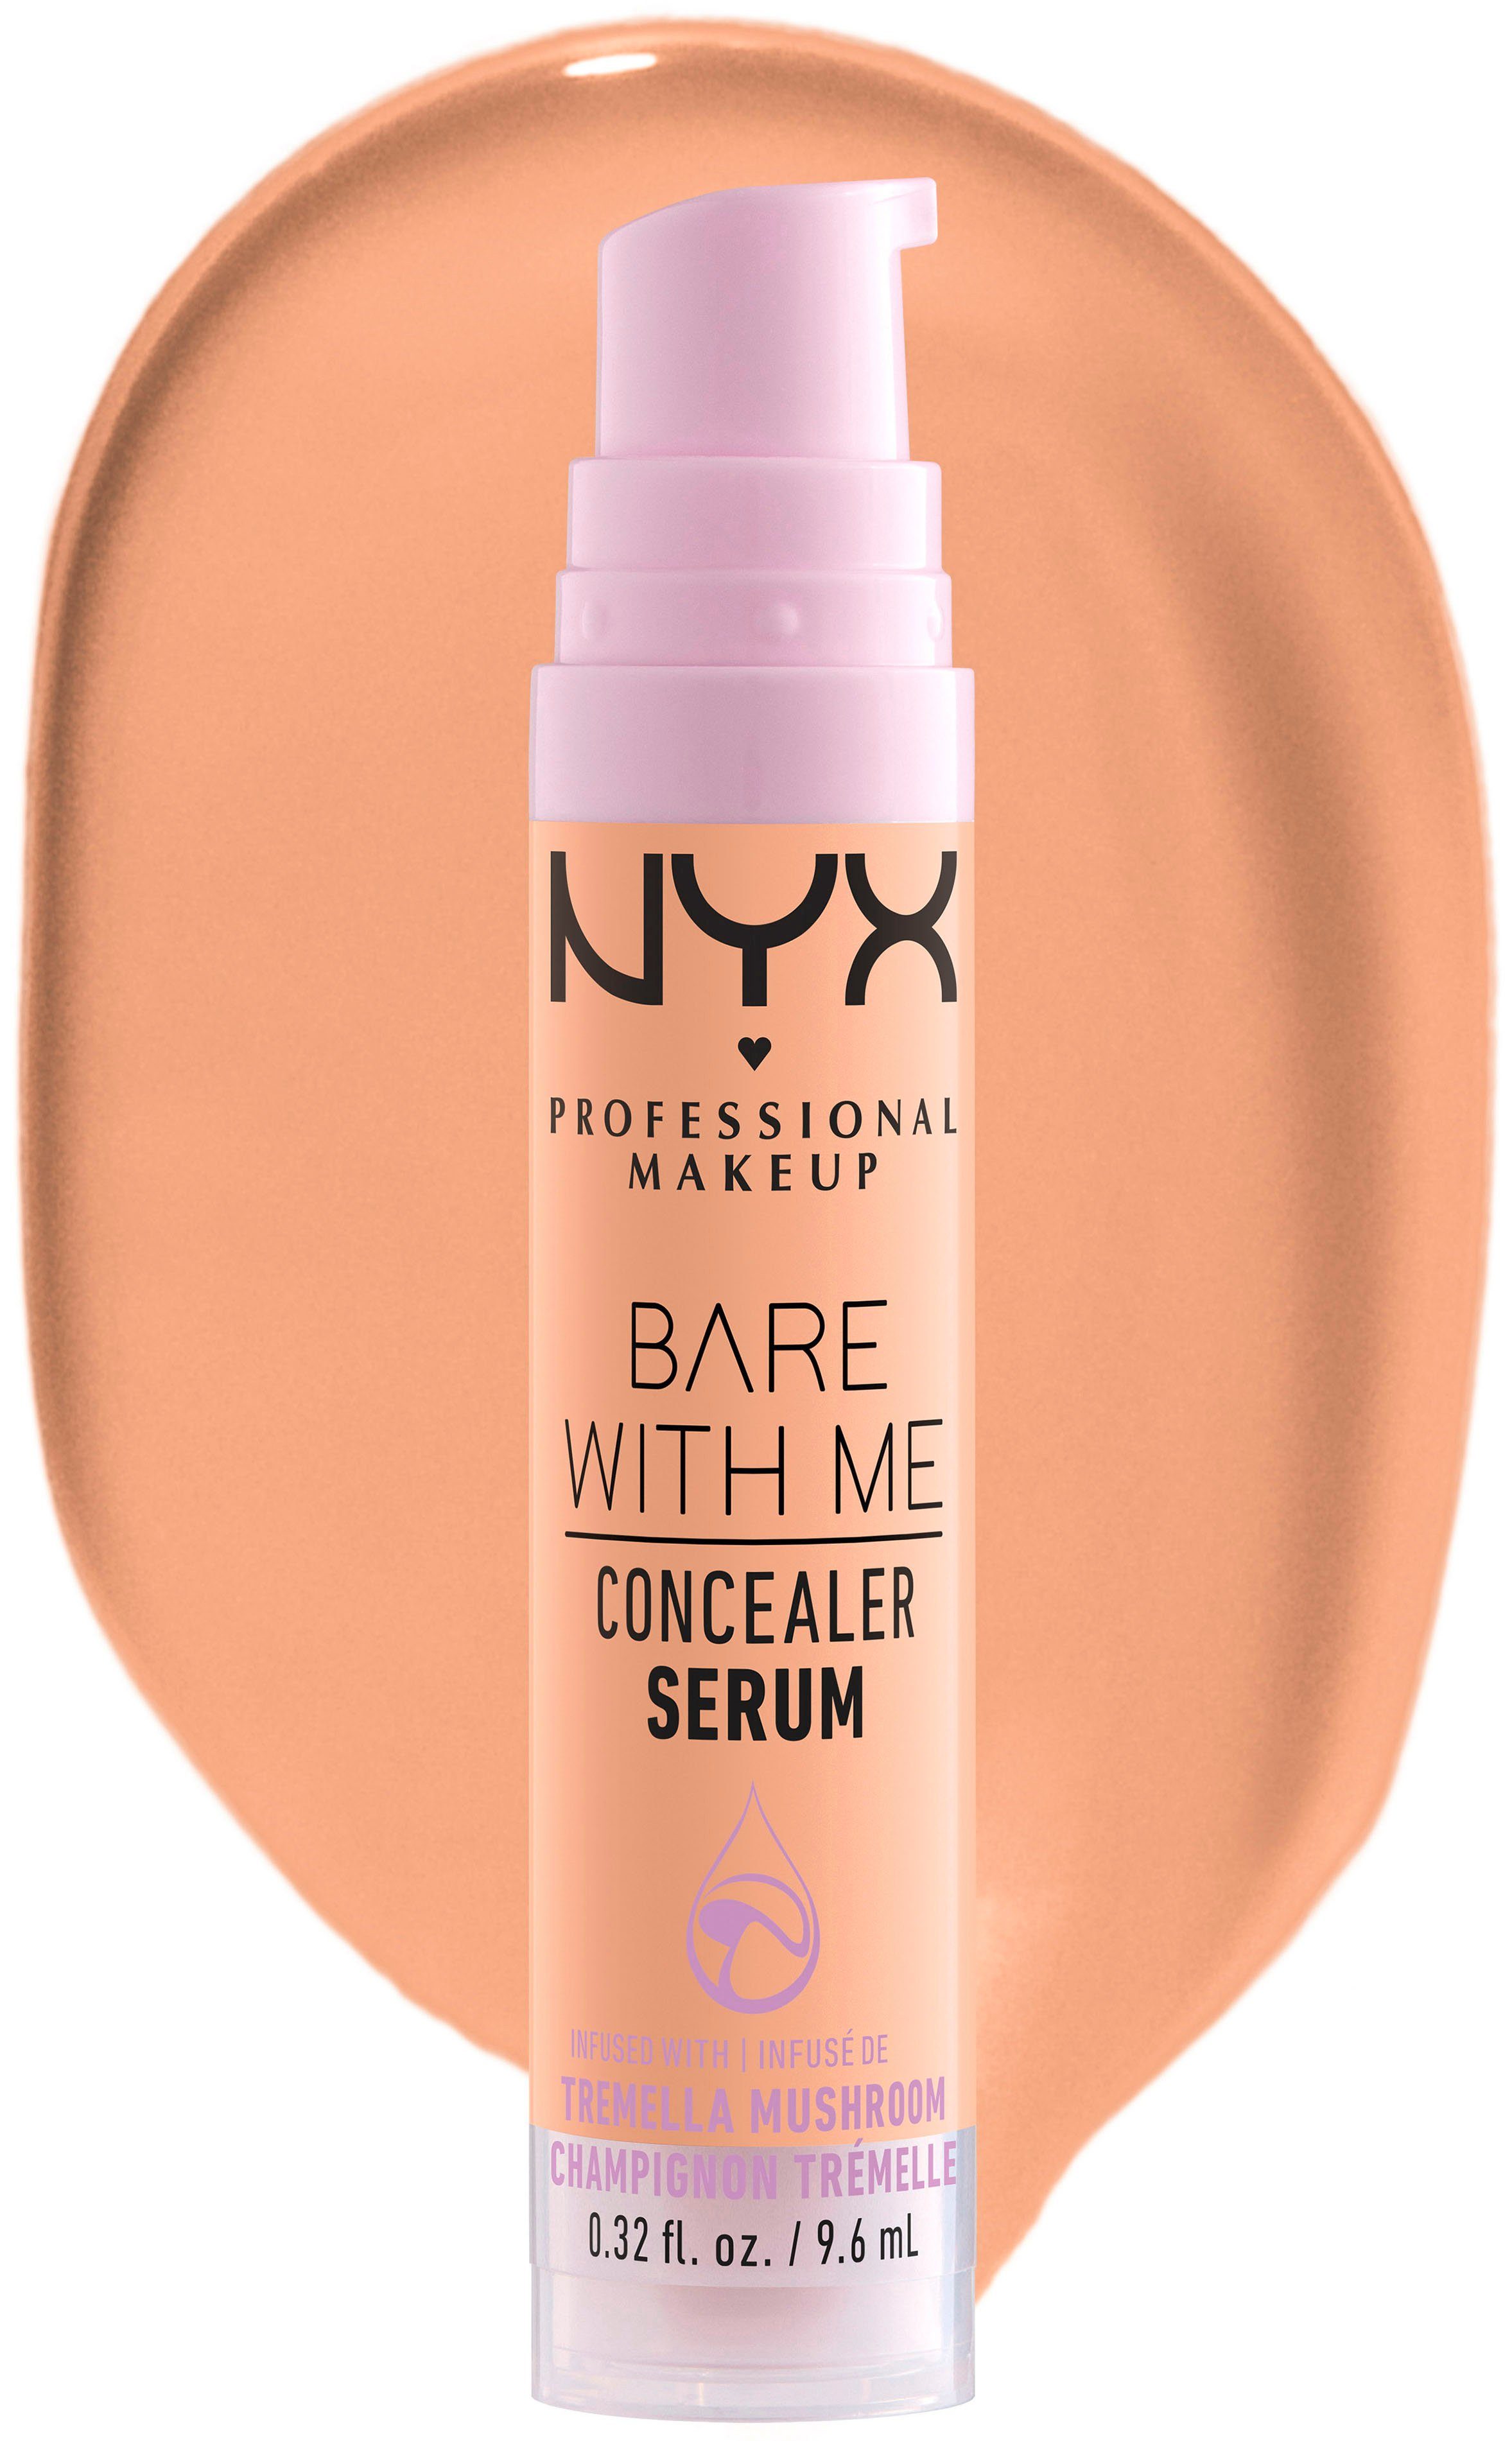 With NYX Bare Me Serum Concealer Concealer